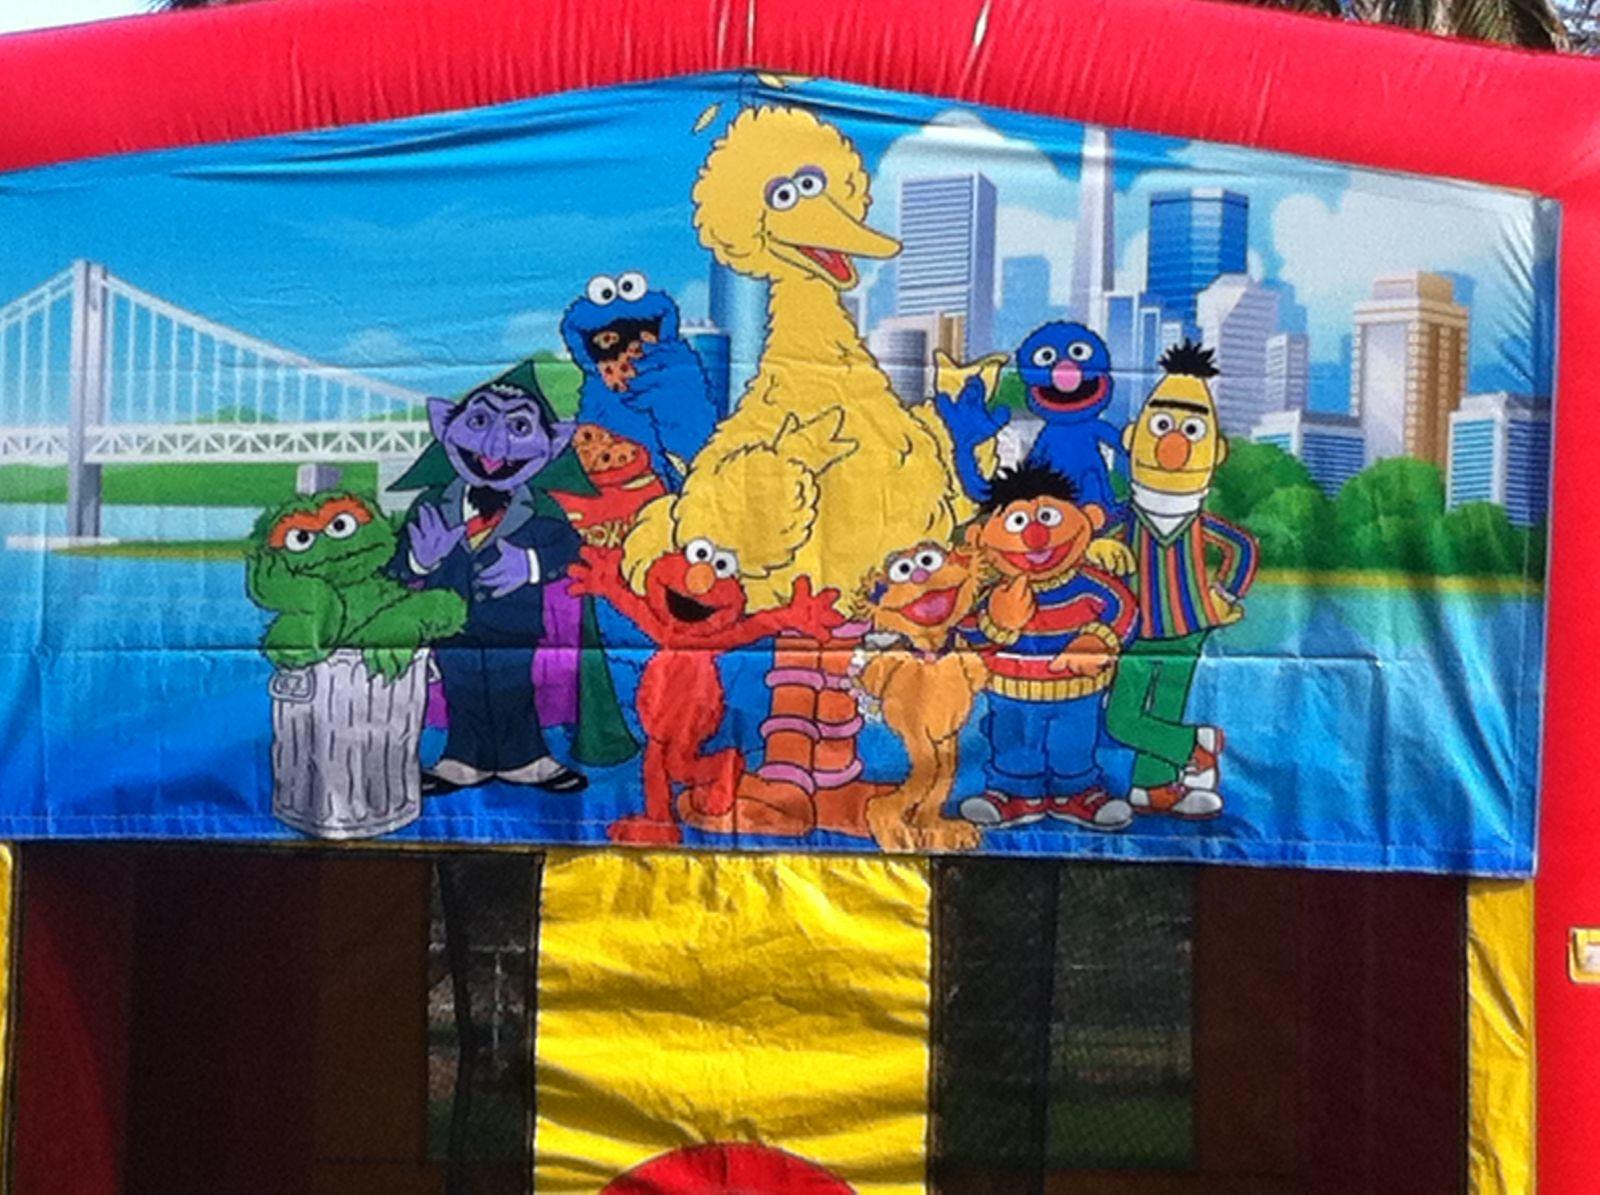 Enjoy your Sesame Street party with all your friends